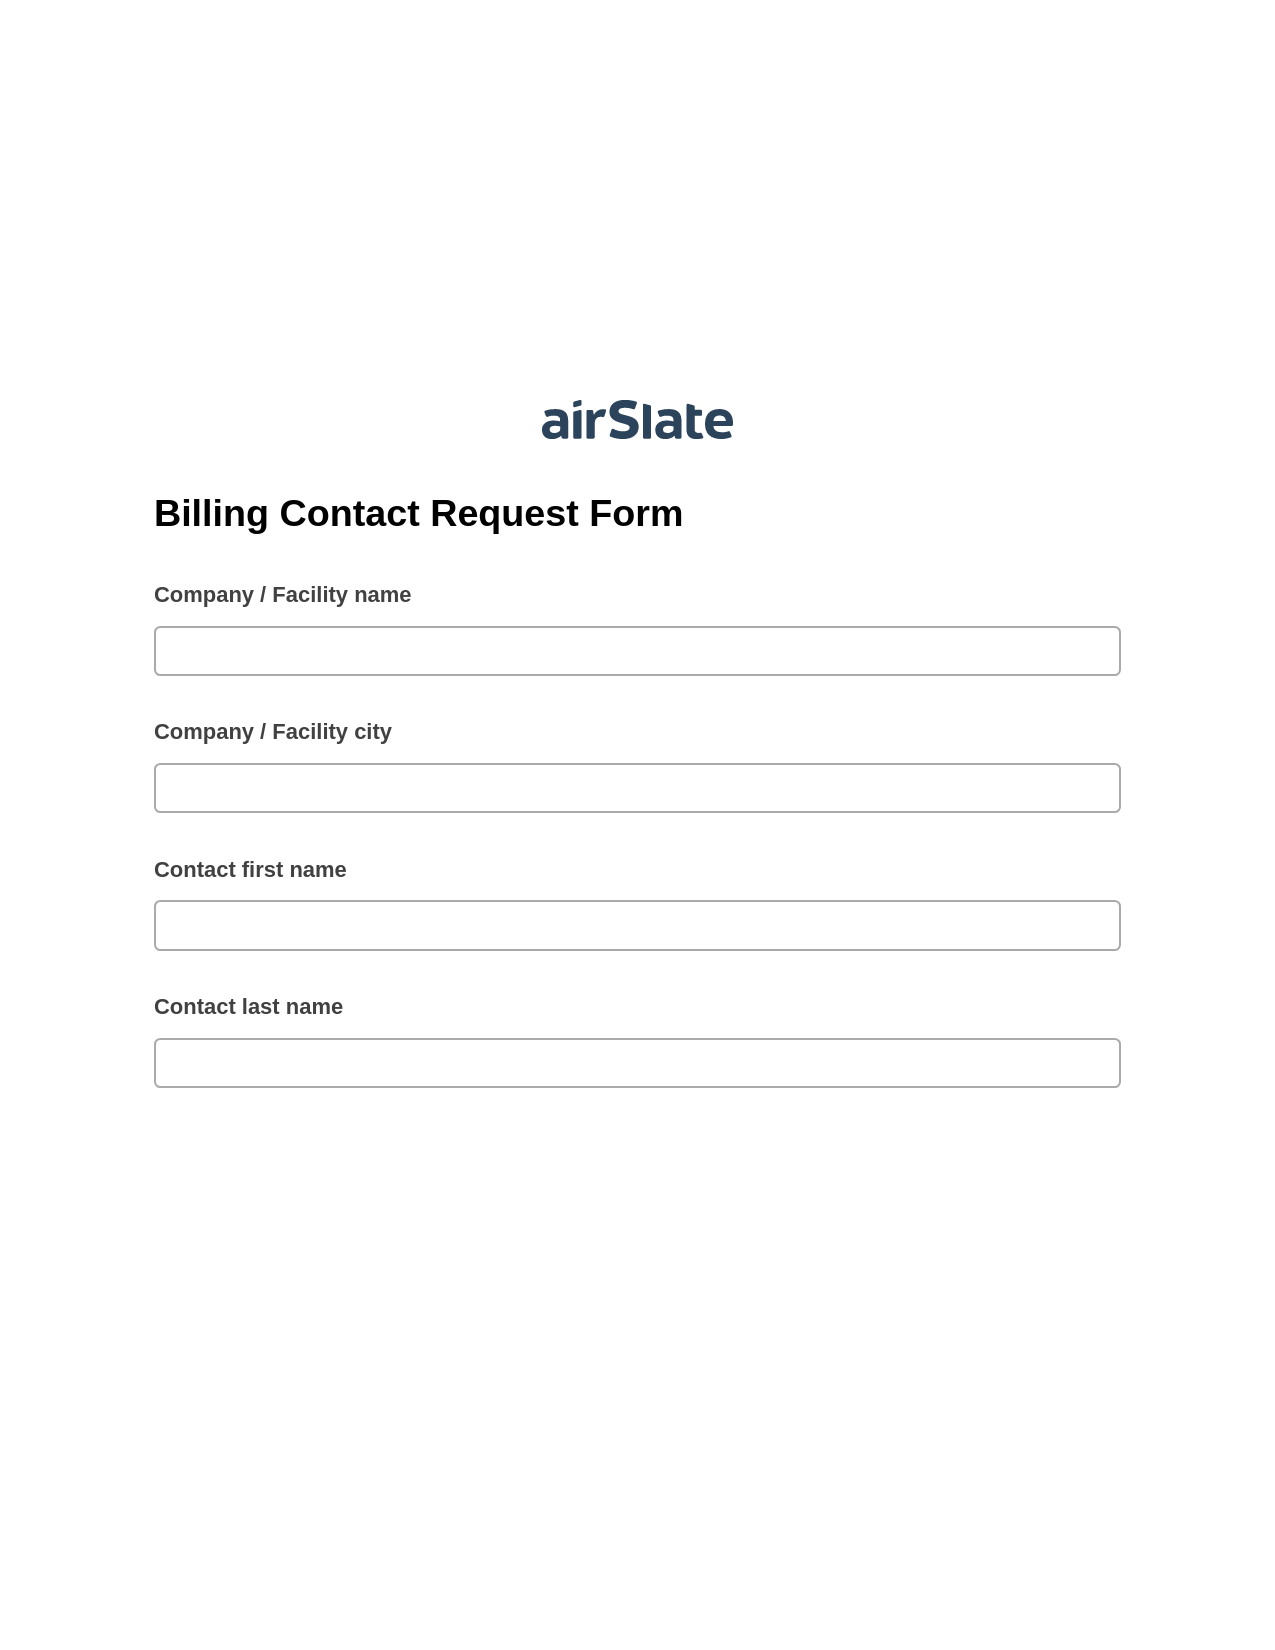 Multirole Billing Contact Request Form Pre-fill Dropdowns from CSV File Bot, Reminder Bot, Webhook Postfinish Bot